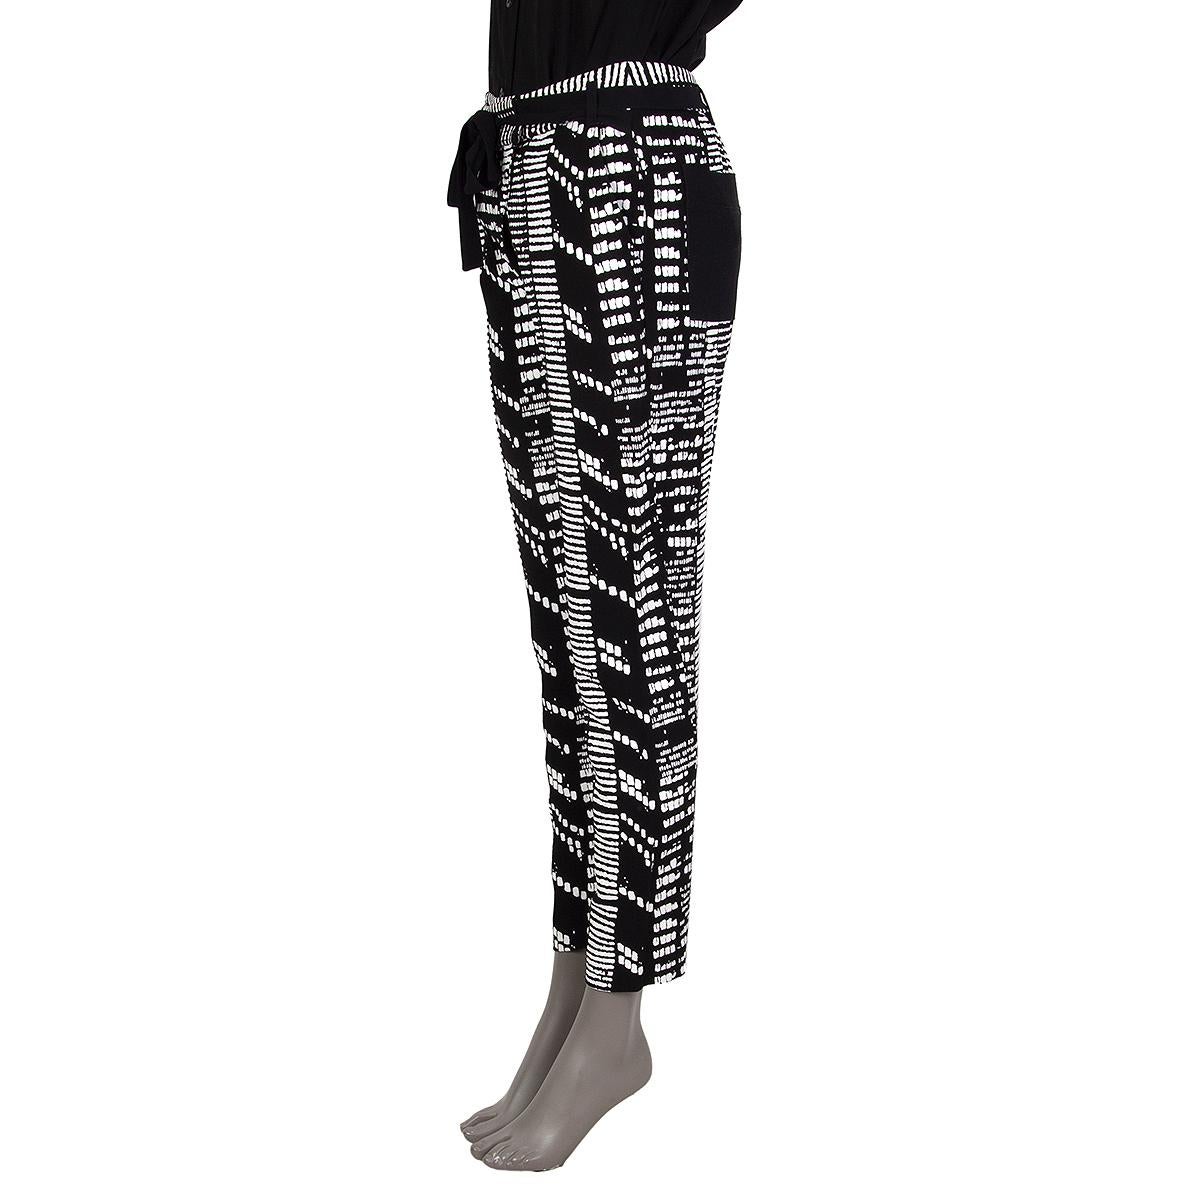 100% authentic Proenza Schouler color cast pants in black viscose (100%) with pockets. White combo is acetate (74%) and viscose (26%). Close on the front with a zipper and attached wrap around belt. Unlined. Have been worn and are in excellent